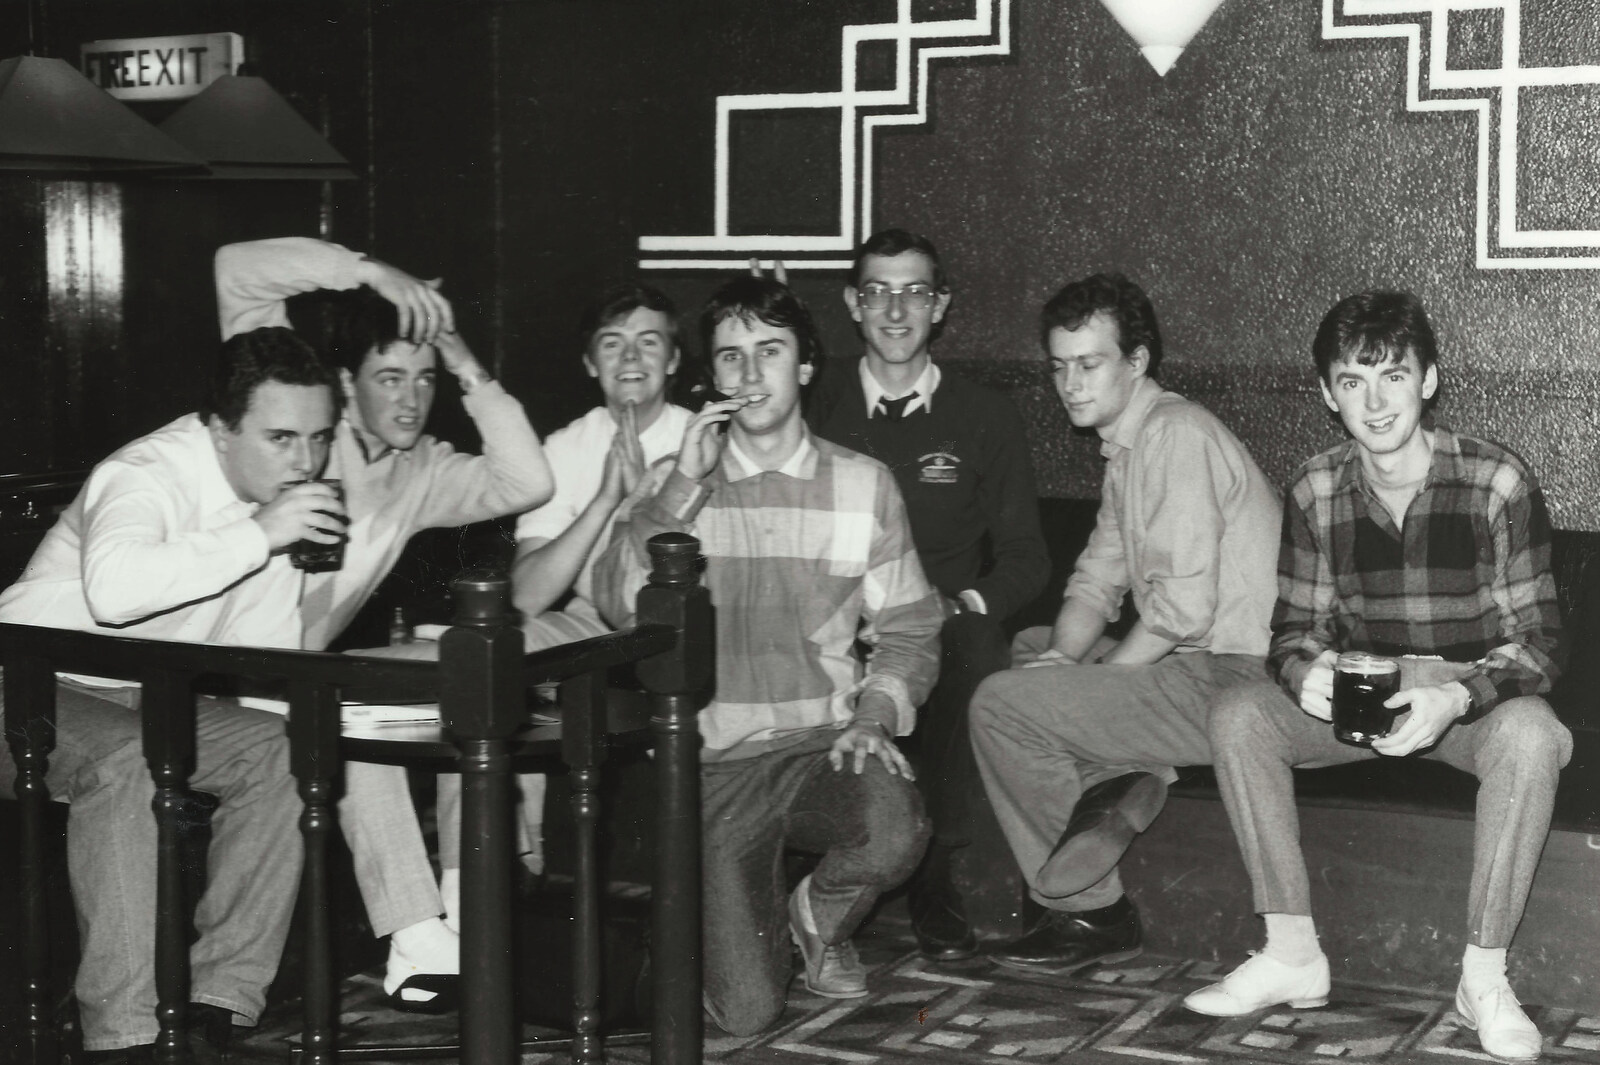 The lads in Snobs nightclub from Uni: The First Year in Black and White, Plymouth Polytechnic, Devon - 8th April 1986